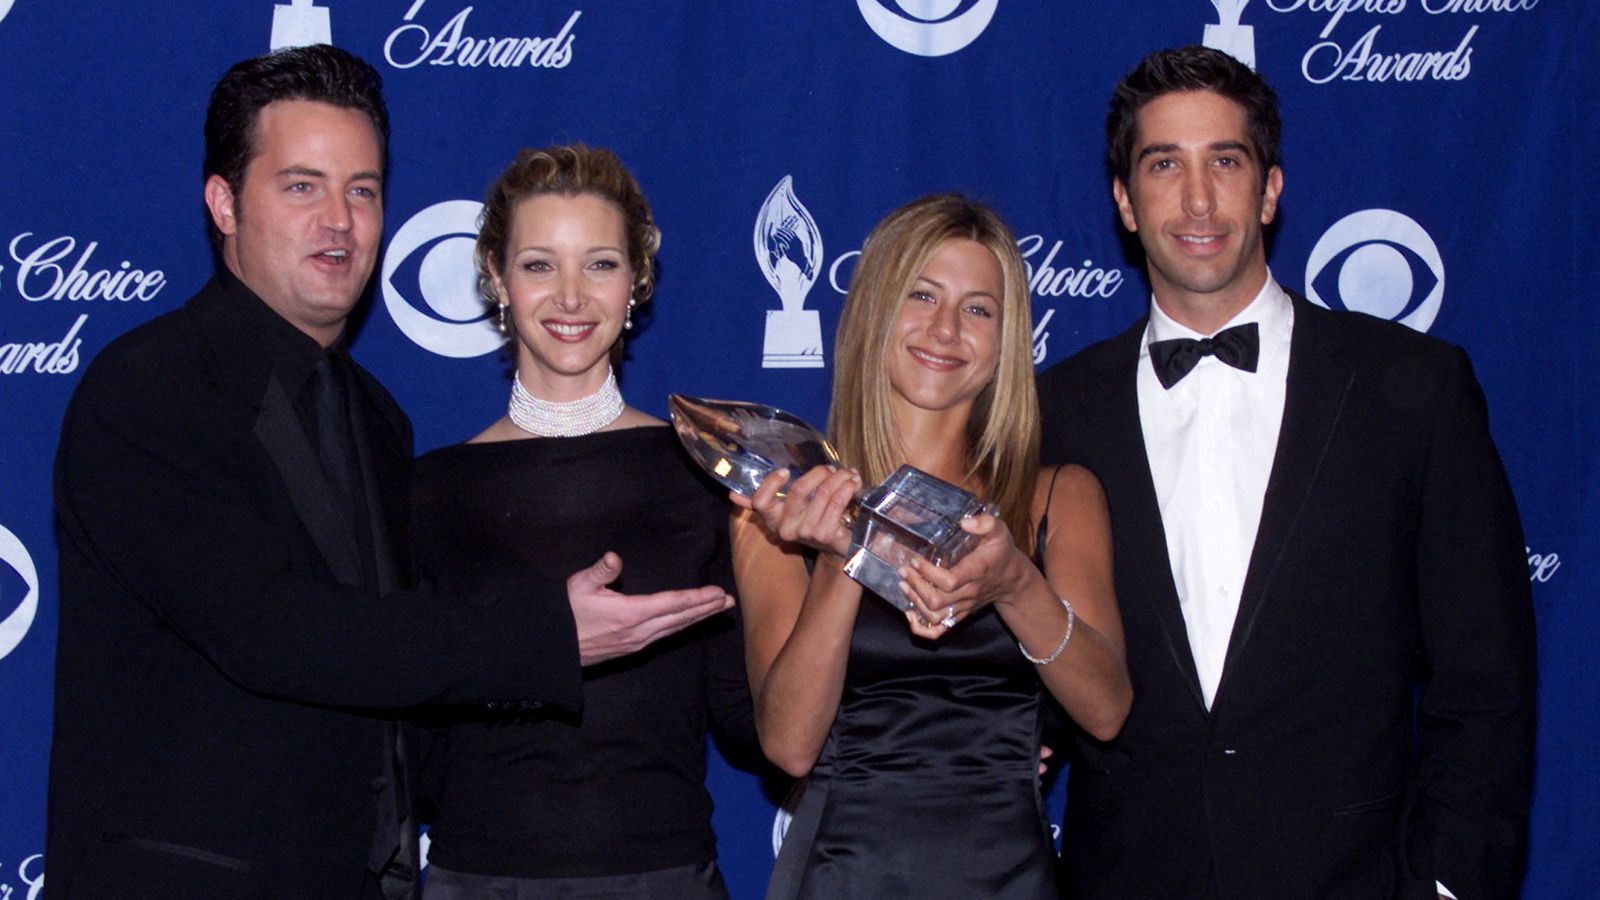 Jennifer Aniston shares text from Matthew Perry as co-stars pay tribute to actor